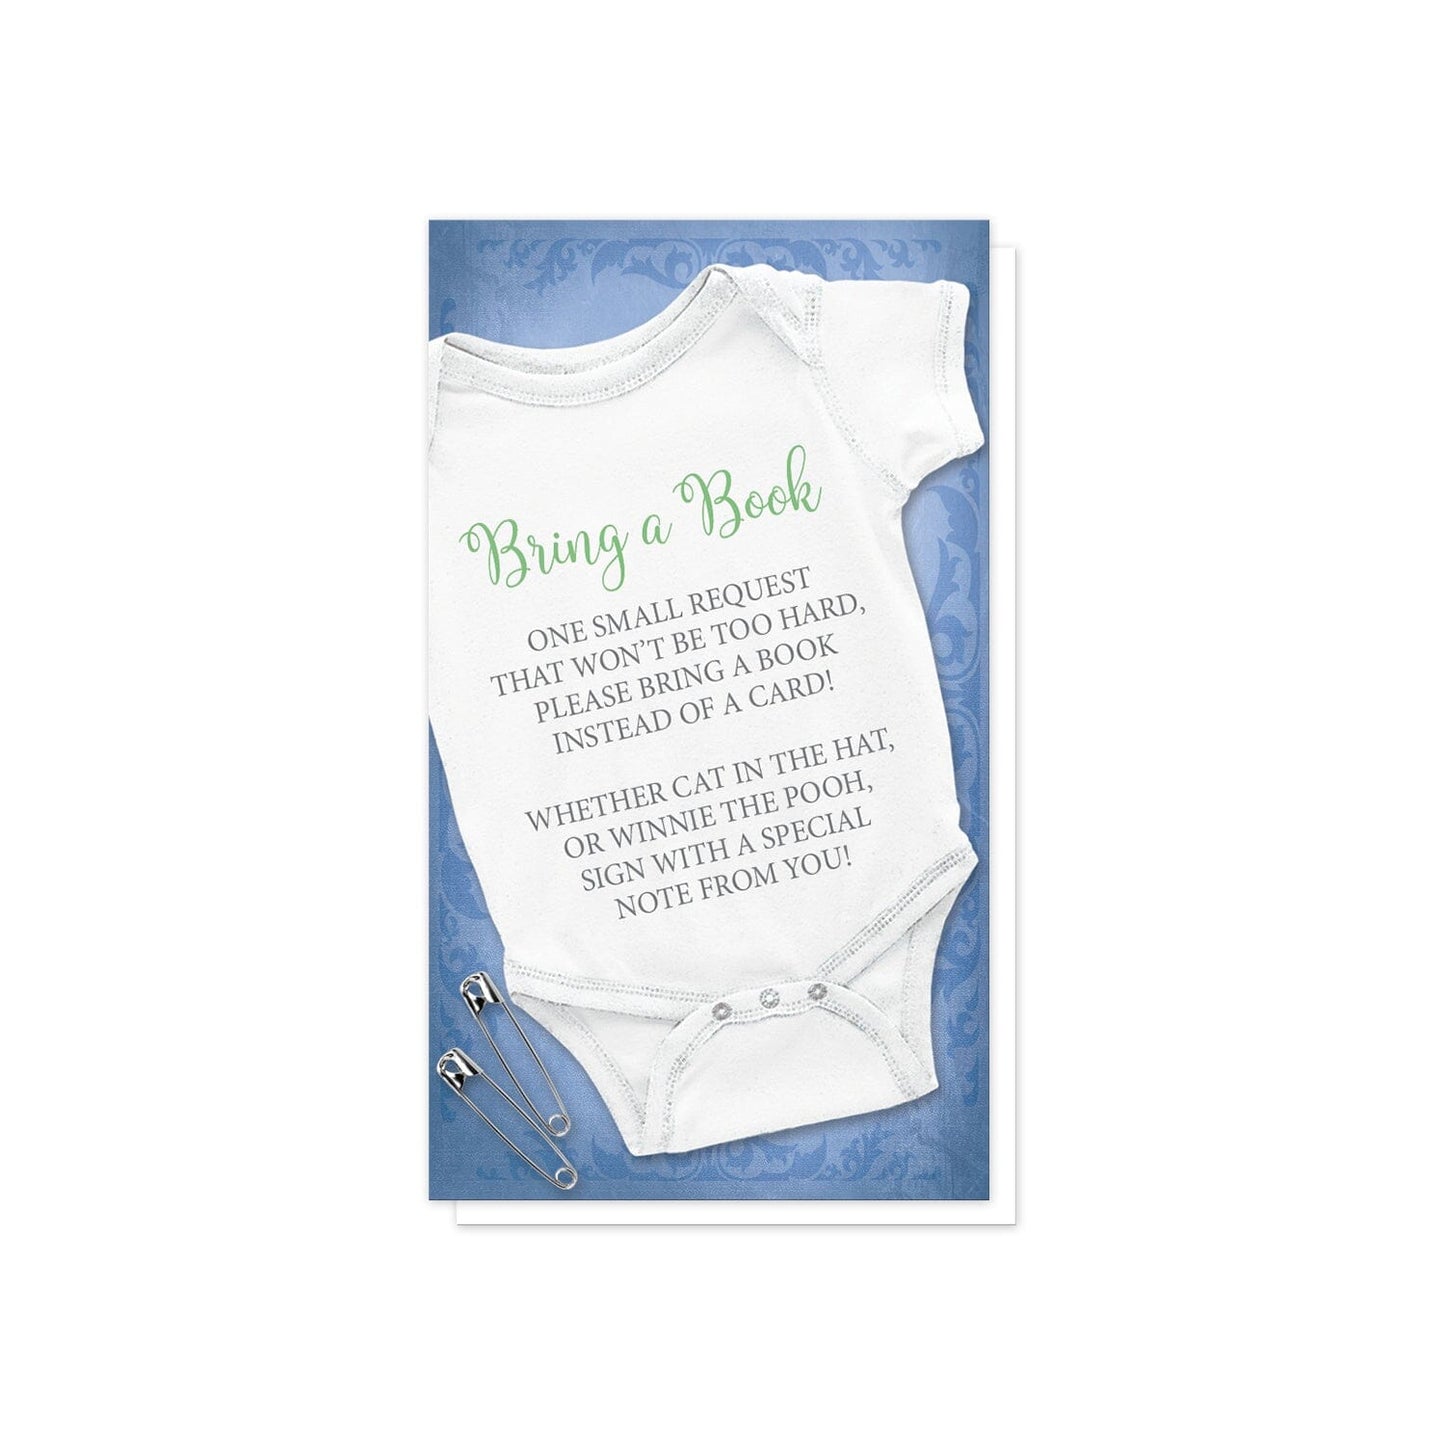 Baby Bodysuit and Safety Pins Blue Bring a Book Cards at Artistically Invited. Uniquely designed baby bodysuit and safety pins blue bring a book cards with an illustration of a white infant bodysuit and two safety pin over a blue flourish background. Your book request details are printed in green and gray on an angle over the white baby bodysuit. 